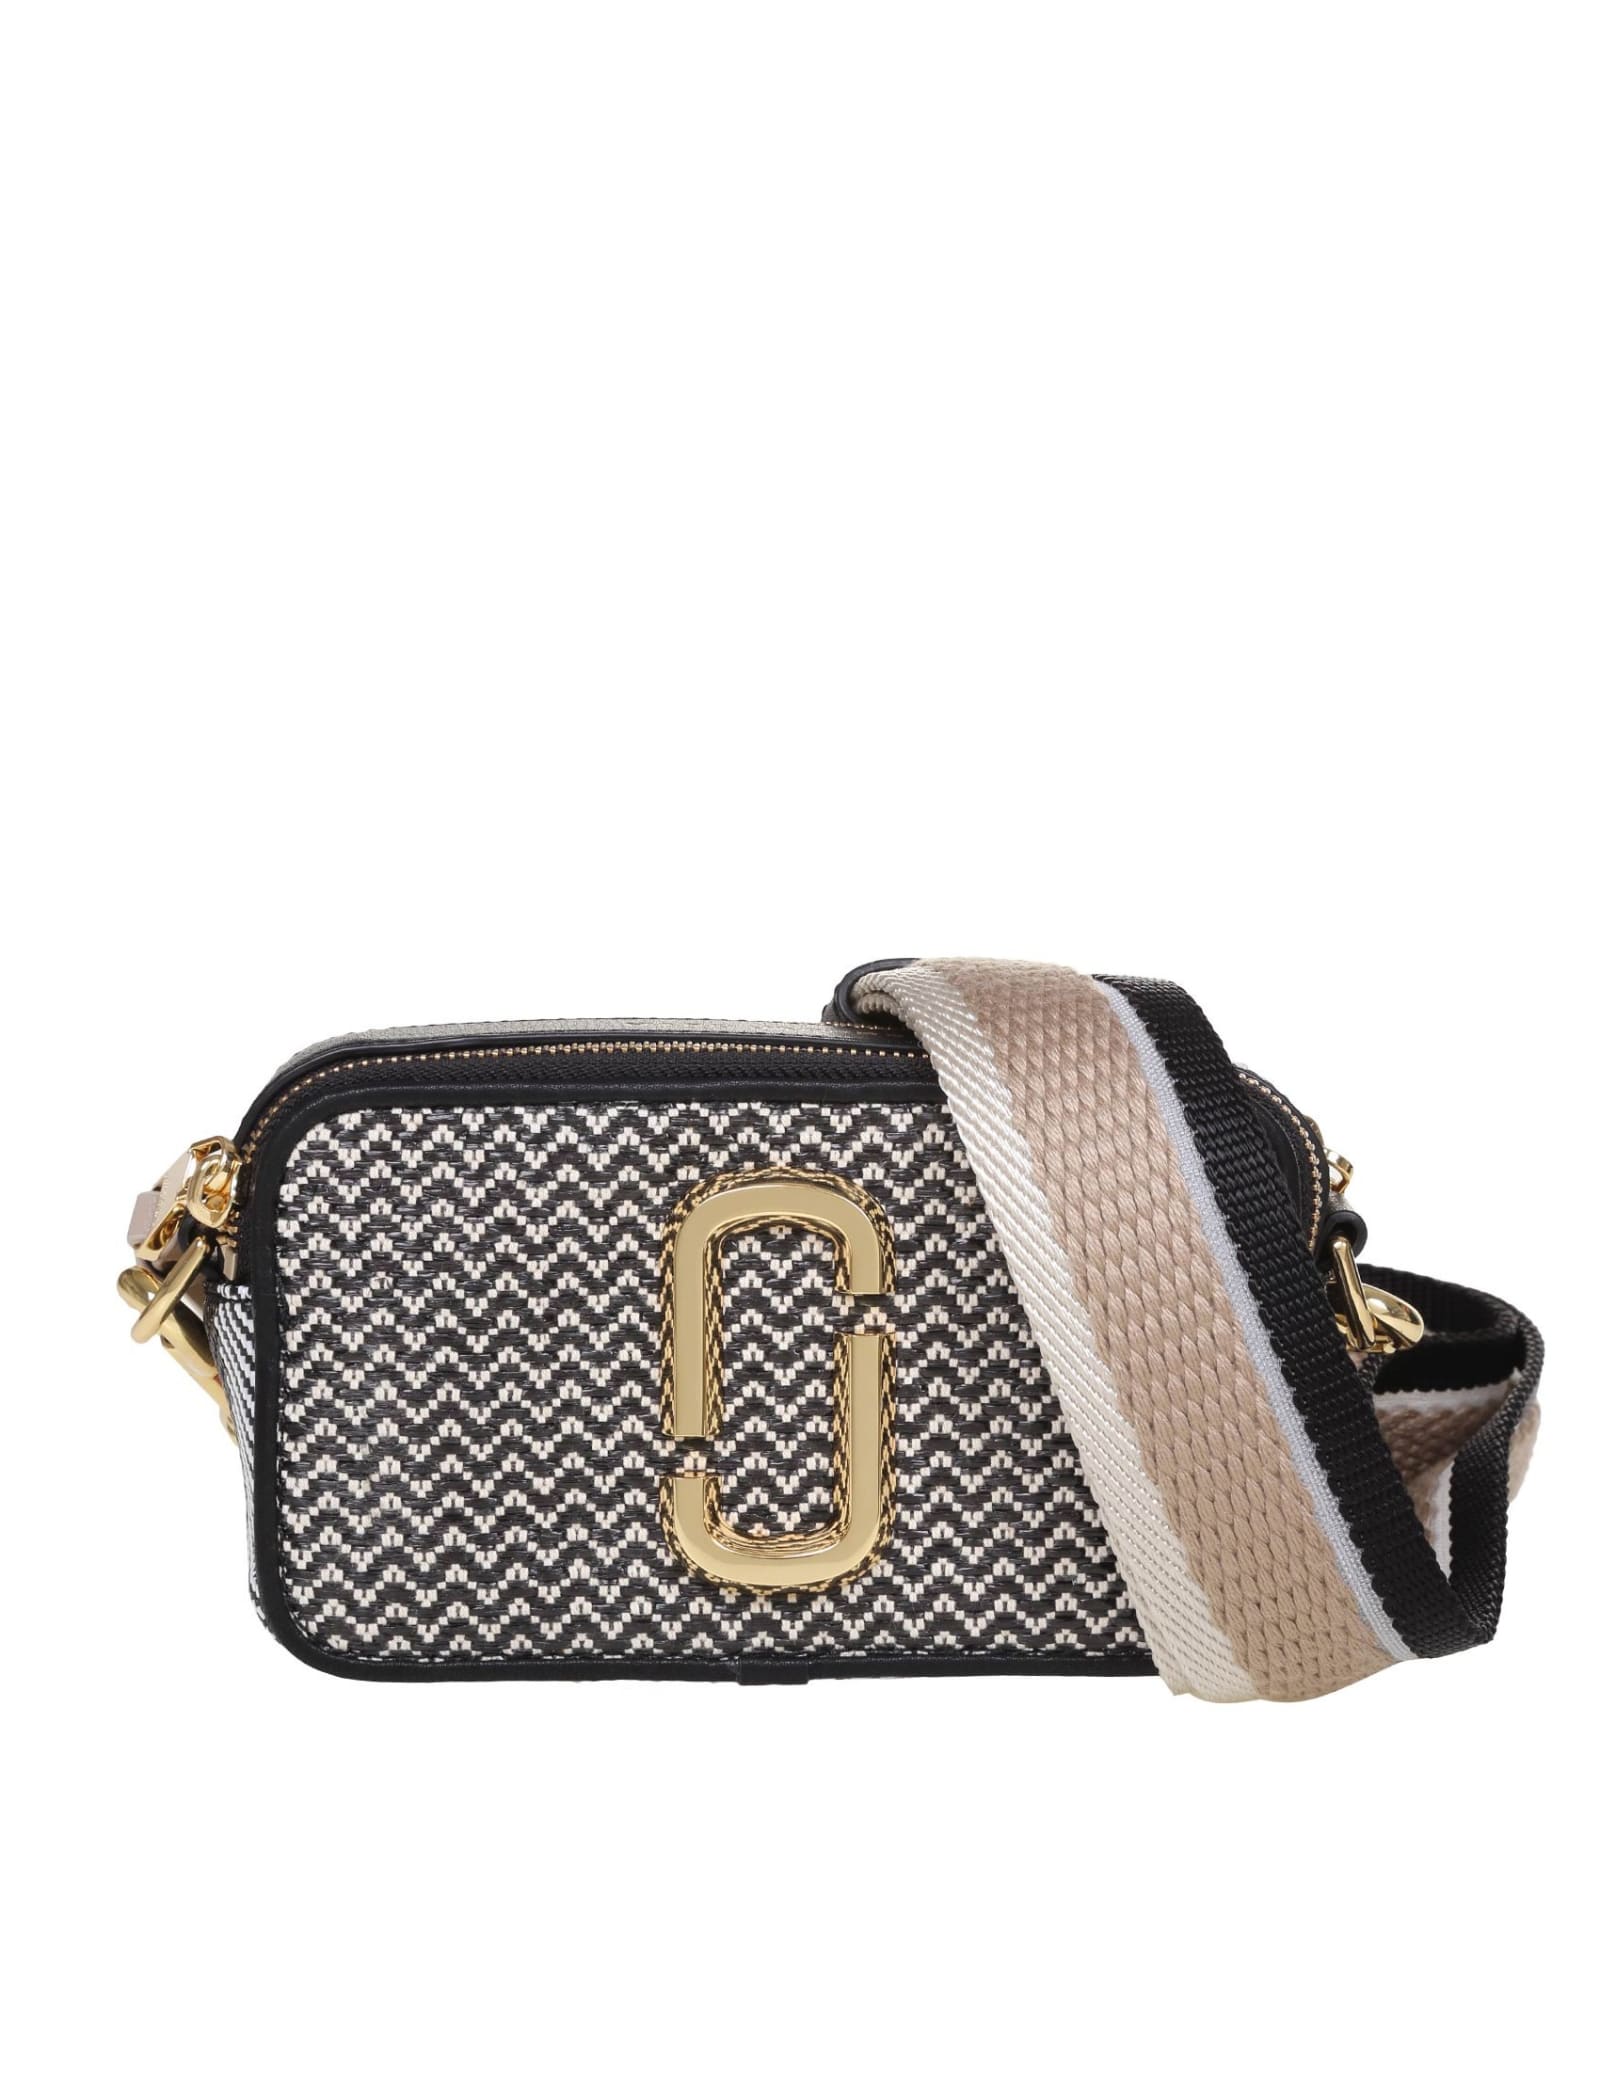 Marc Jacobs Snapshot Bag In Braided Fabric In Black | ModeSens